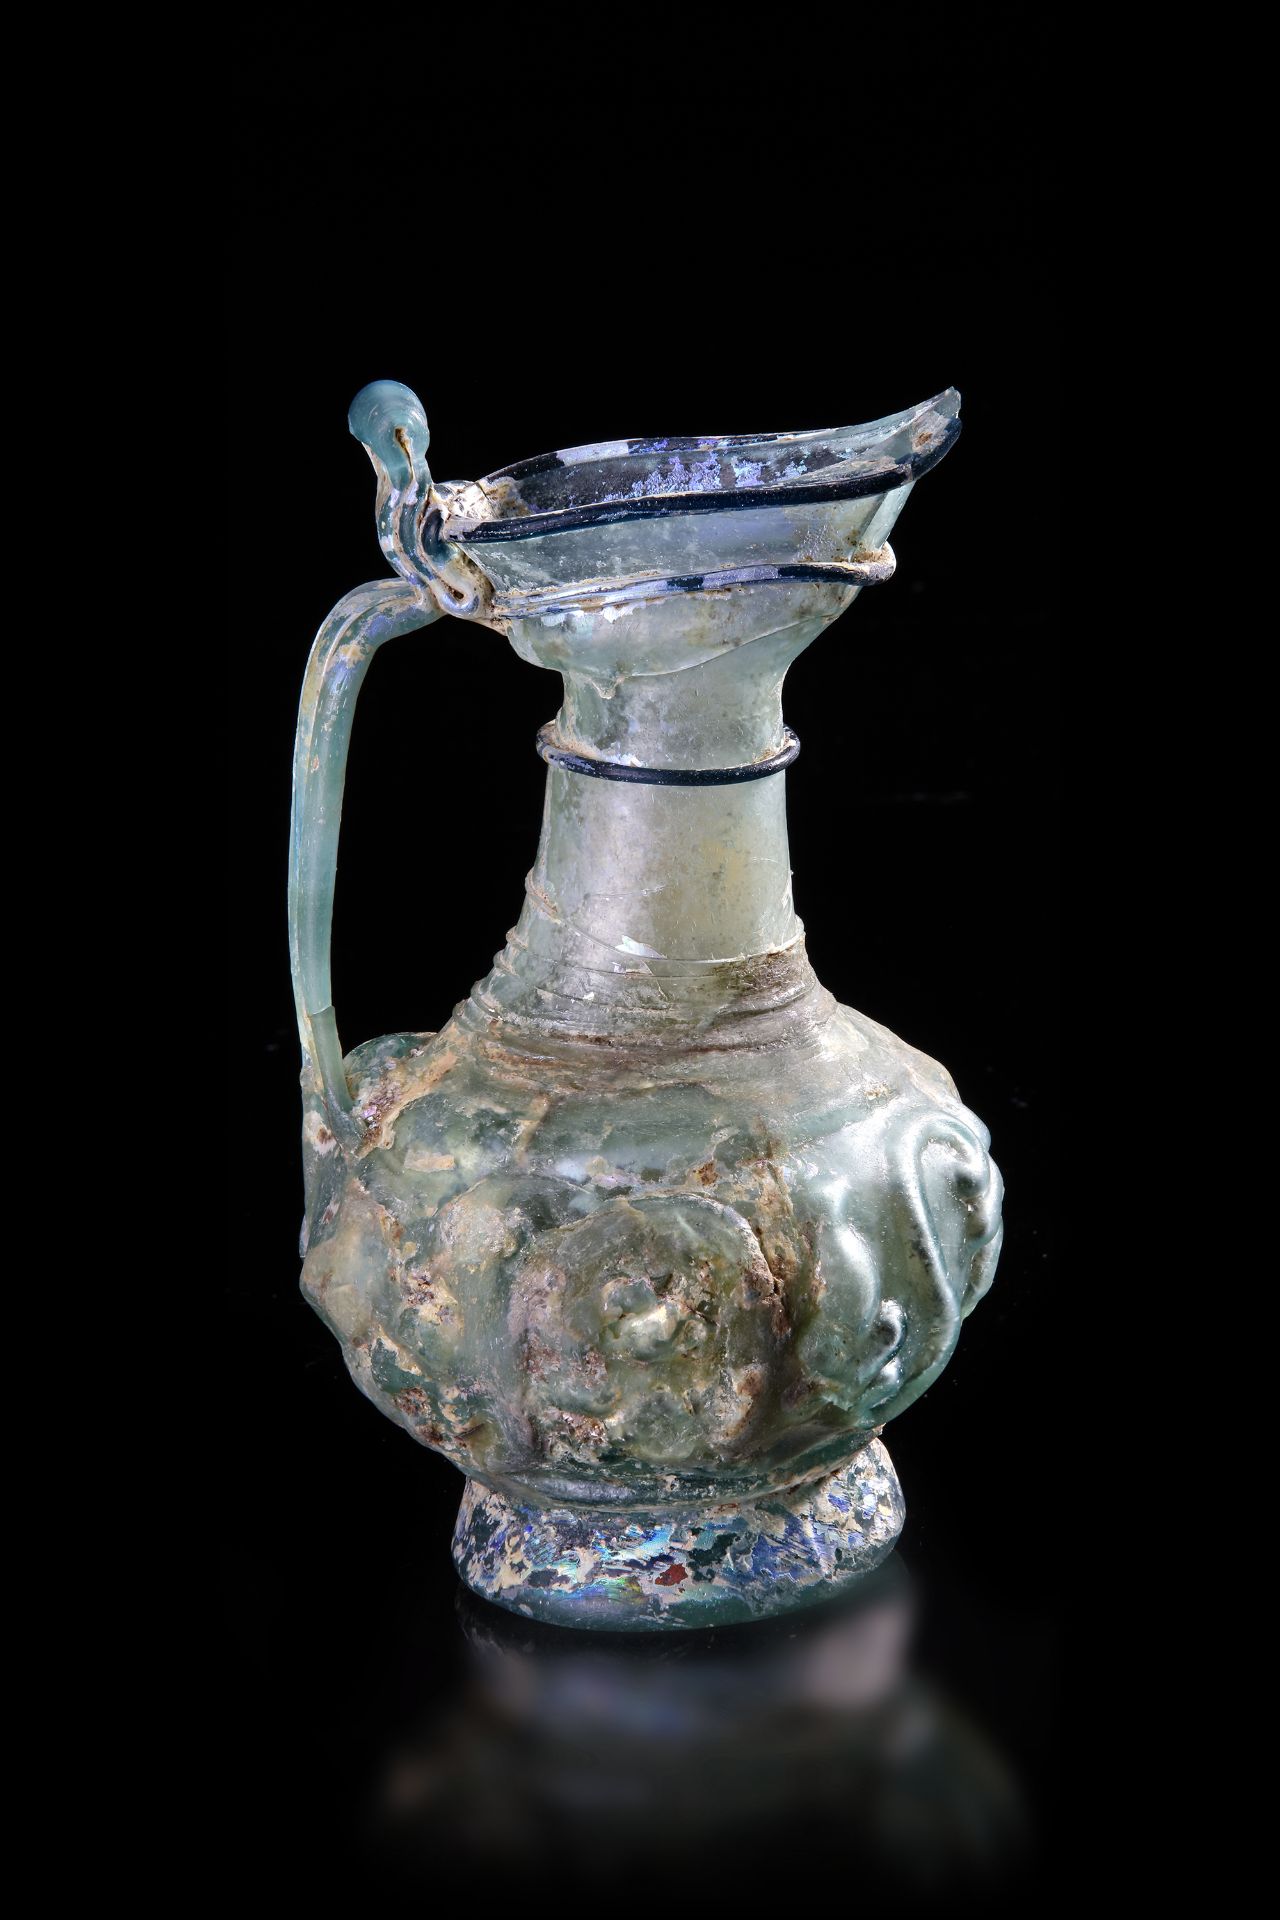 A GLASS EWER WITH SPOUT, PERSIA, 10TH-12TH CENTURY - Image 10 of 12